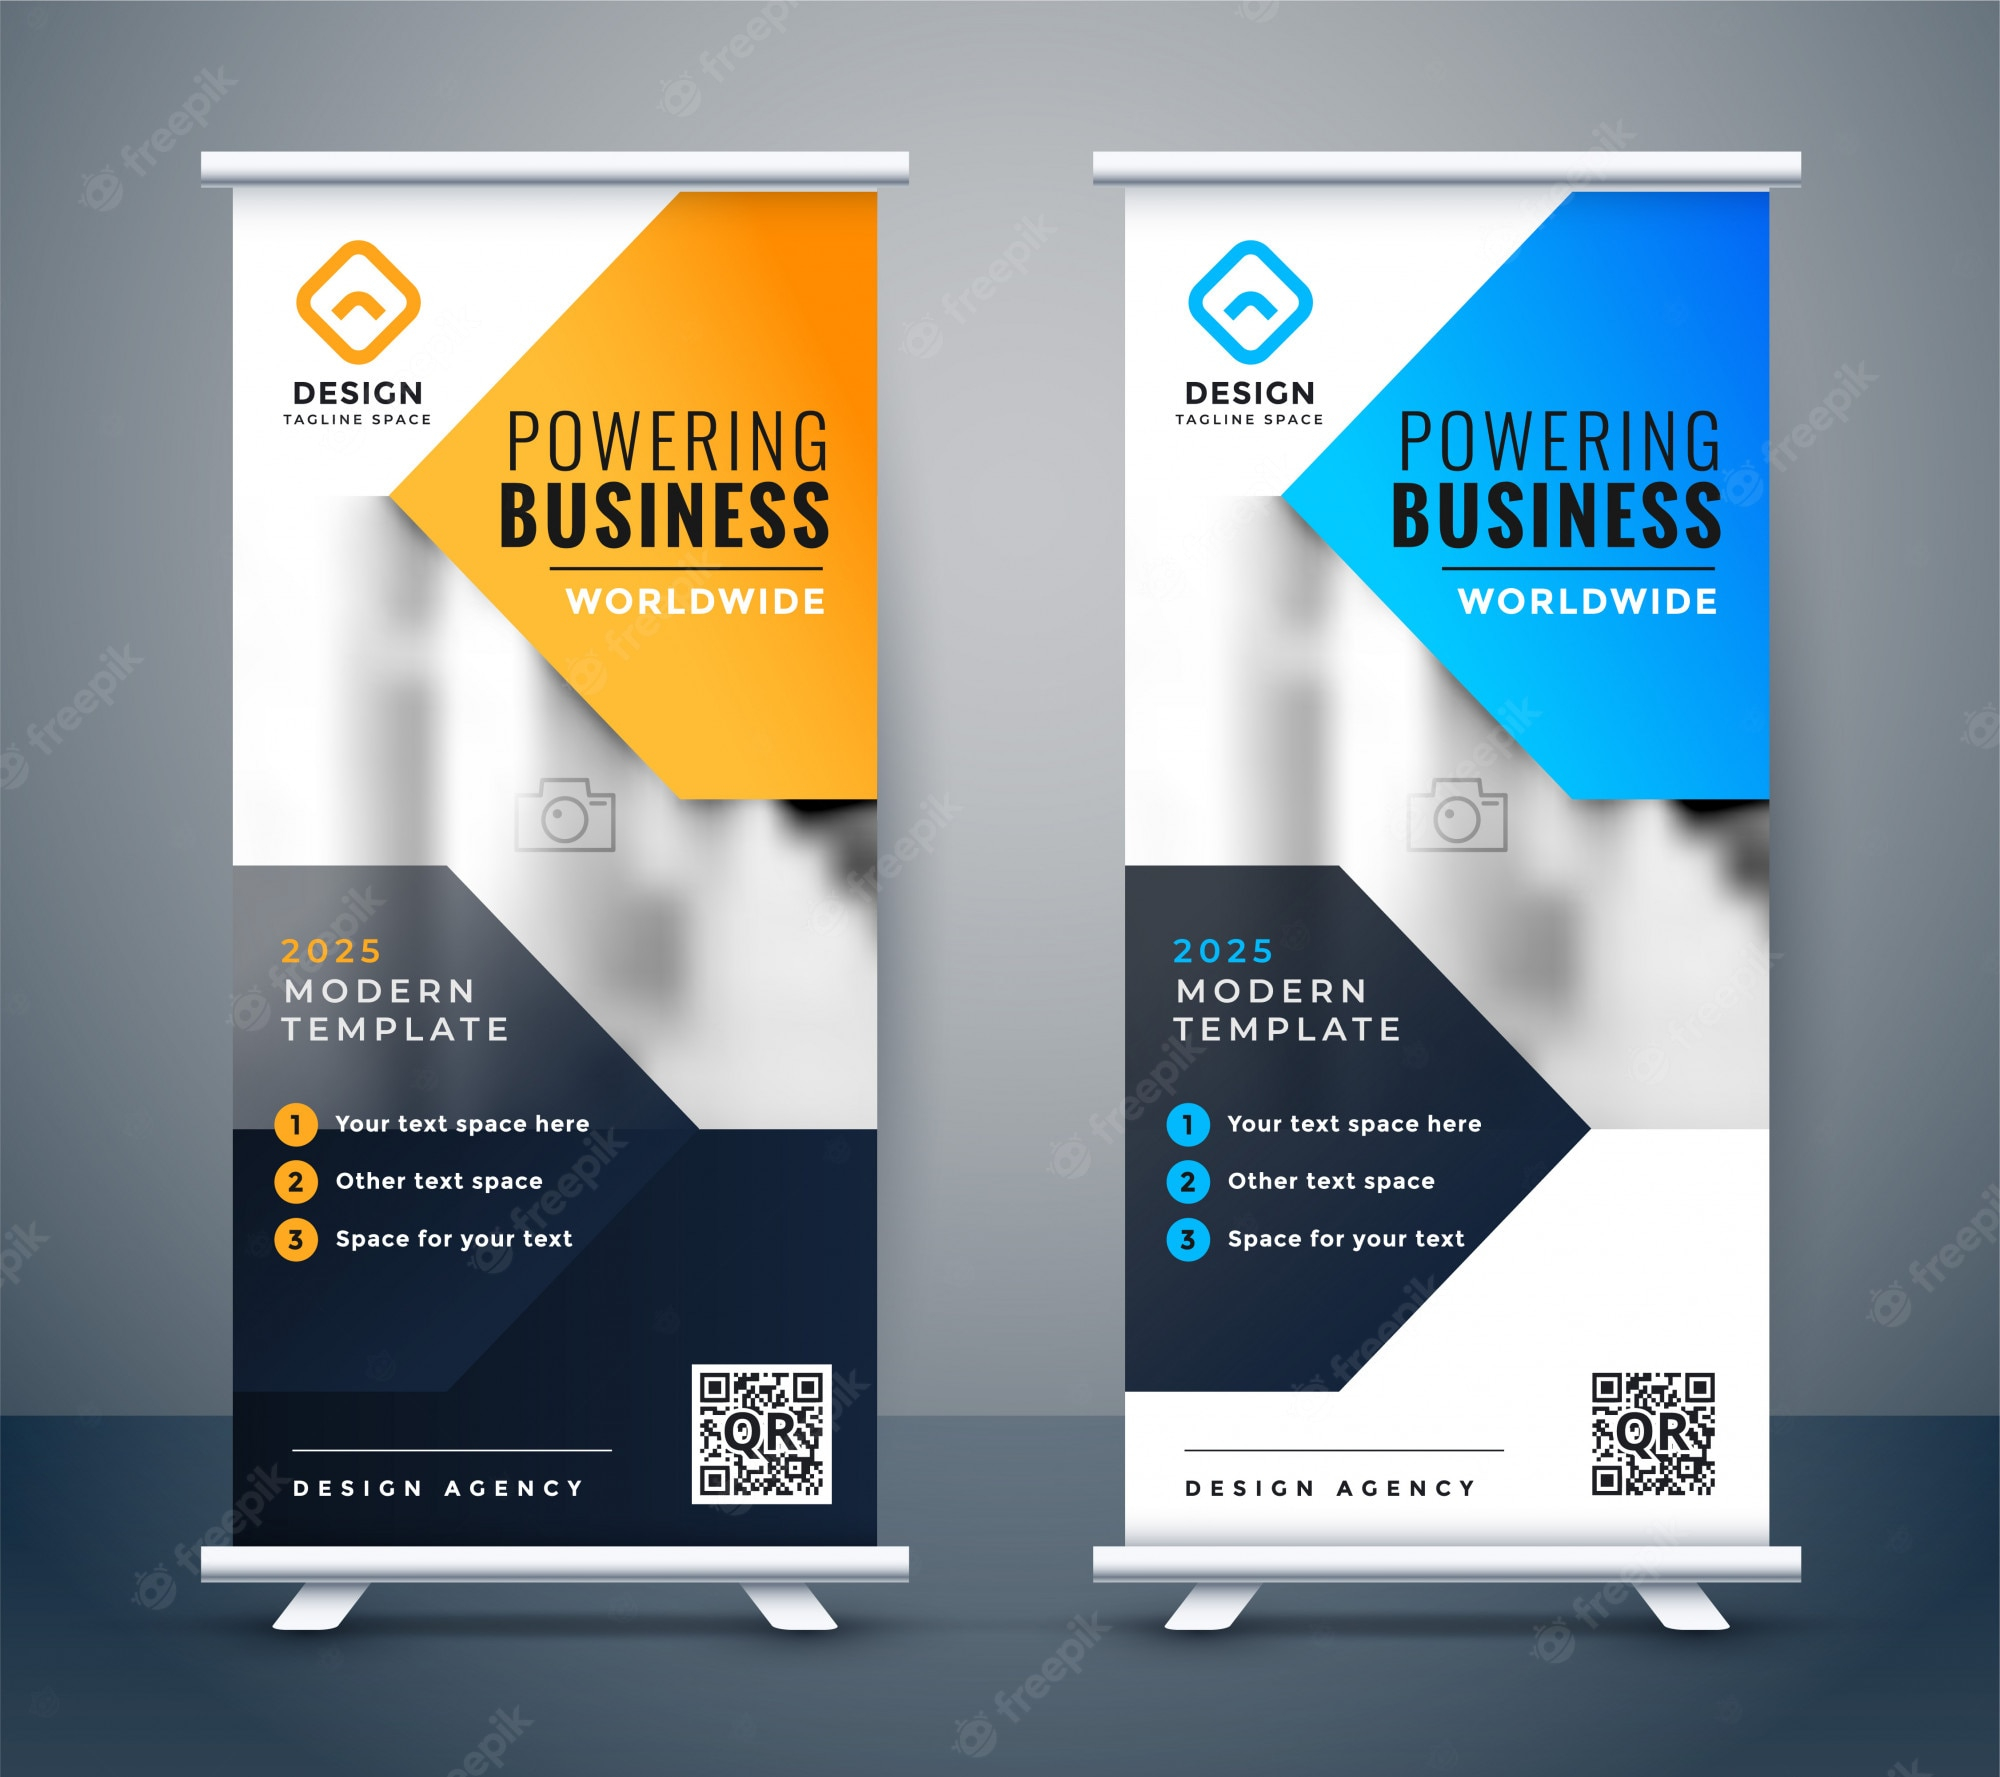 Roll Up Banner Design Images  Free Vectors, Stock Photos & PSD Intended For Pop Up Banner Design Template